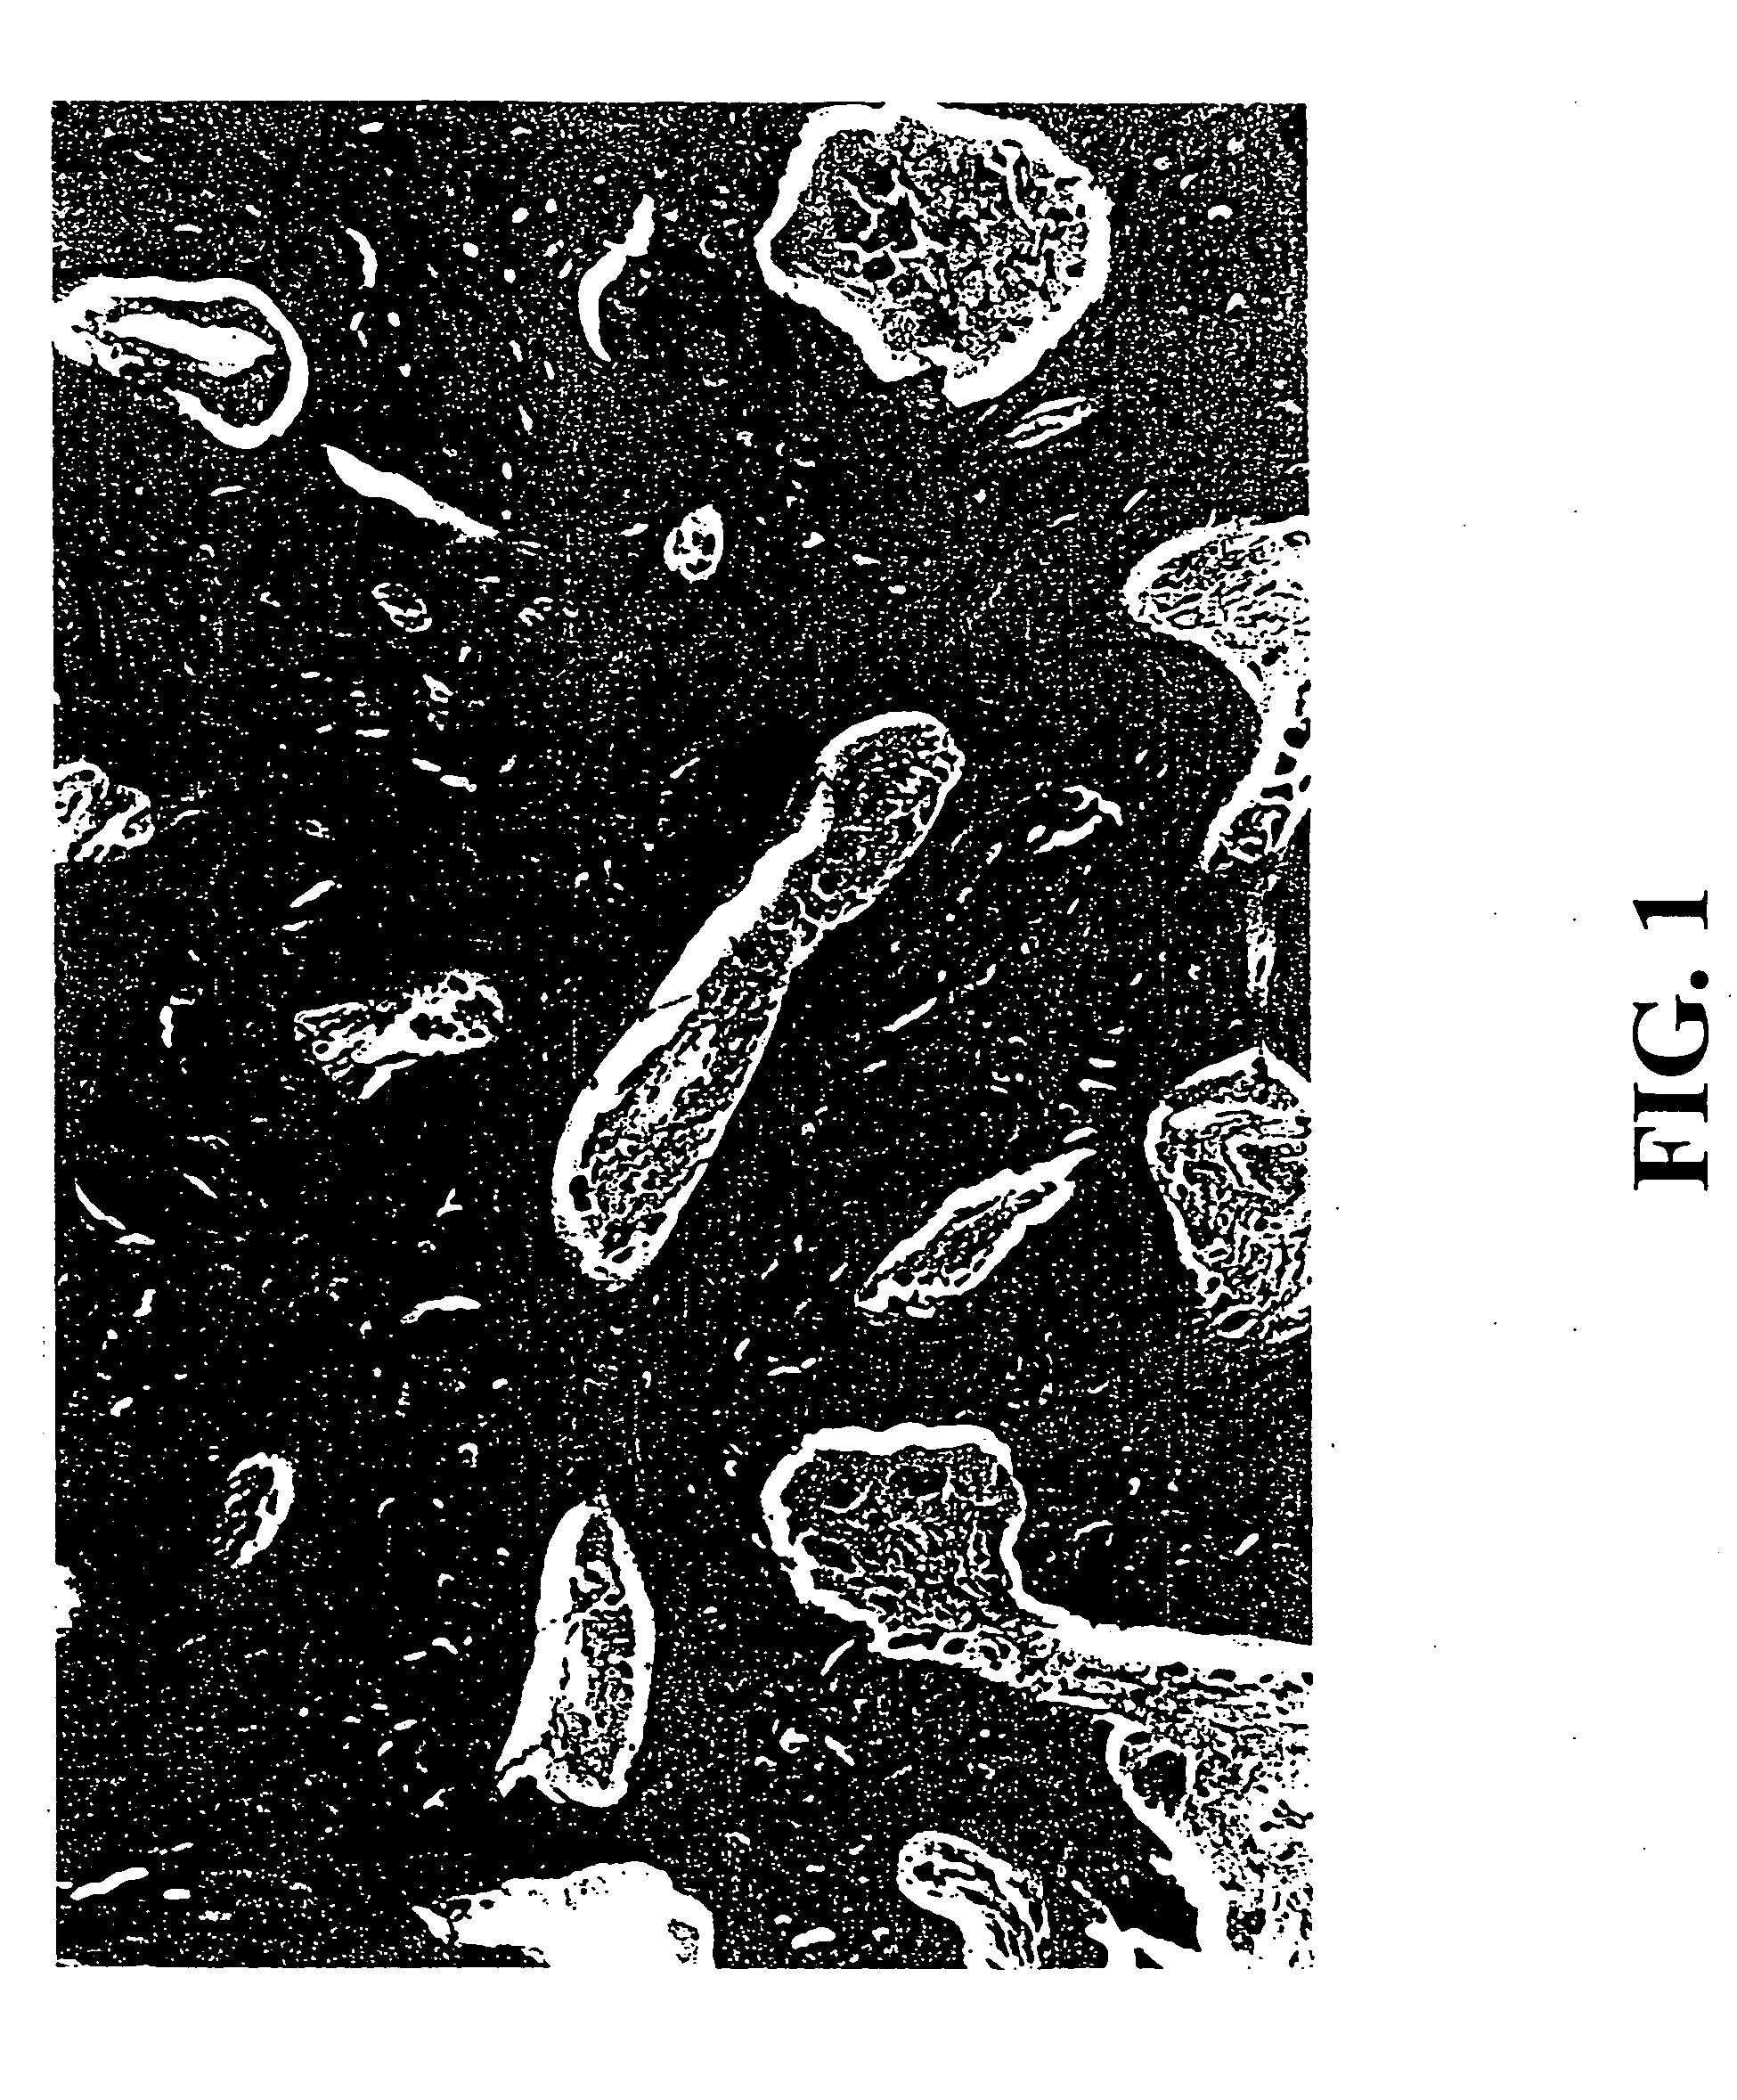 Transplantable particulate bone composition having high osteoinductive capacity and methods for making and using same